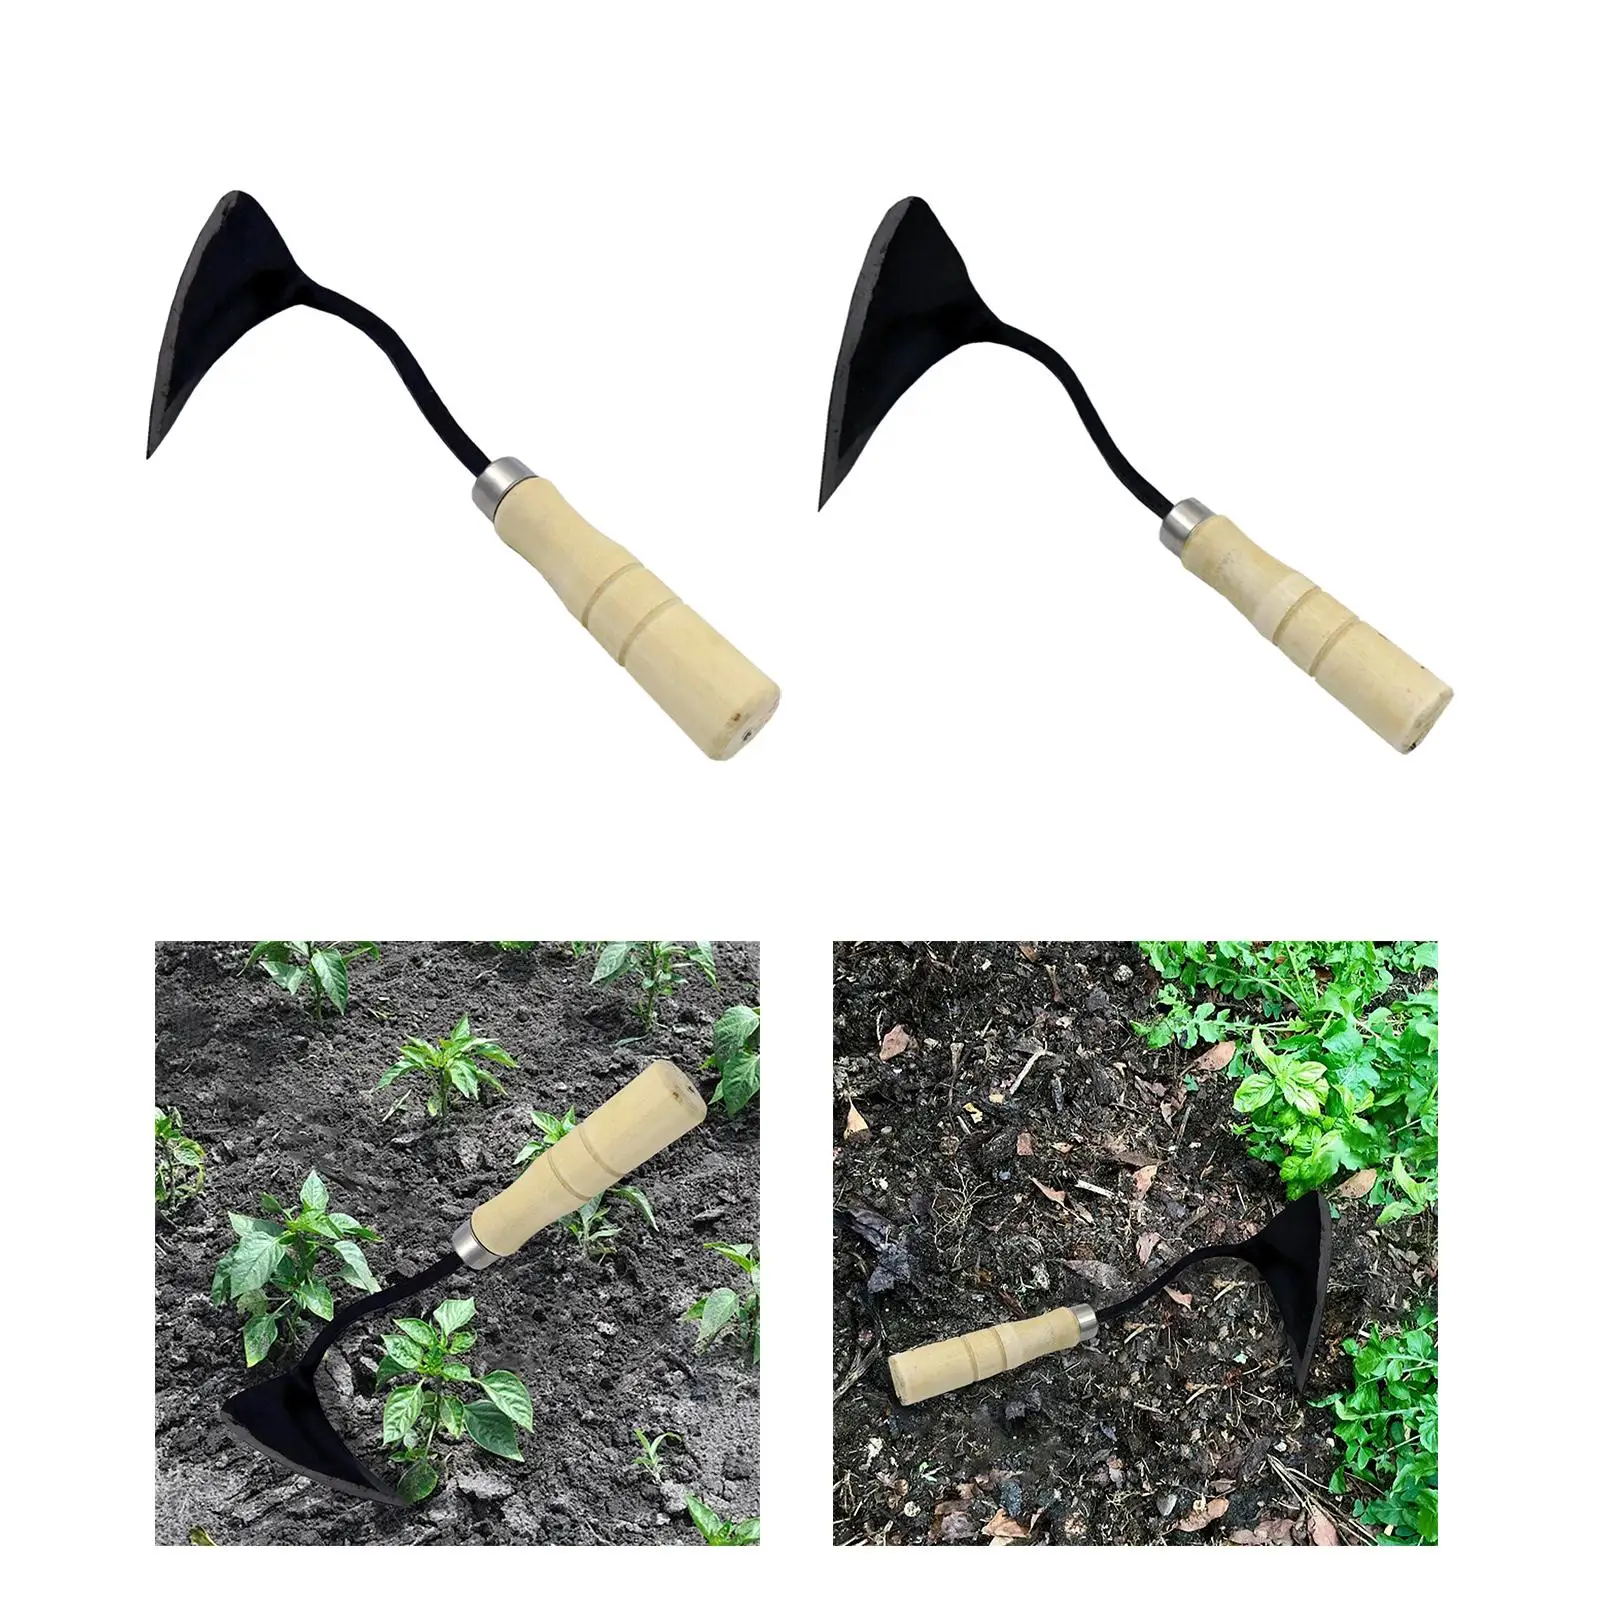 Gardening Plow Hoe Forged Less Effort Potato Digger Tools Planting Loosening Soil Hoe for Weeding Vegetable Kids and Adults